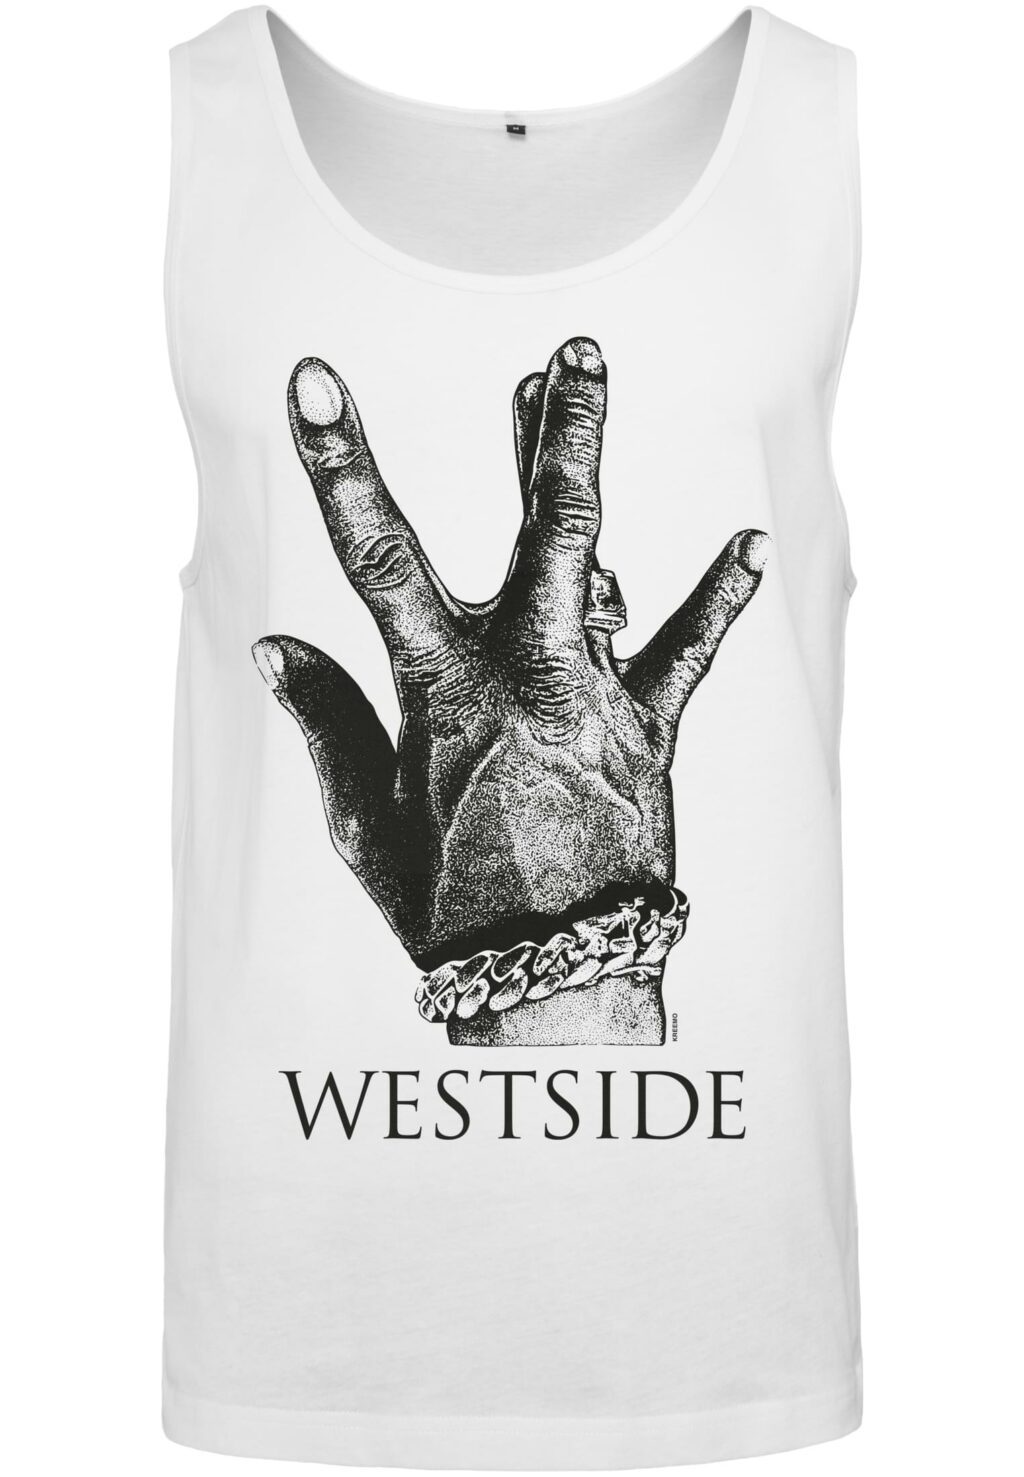 Westside Connection 2.0 Tank Top white MT2576